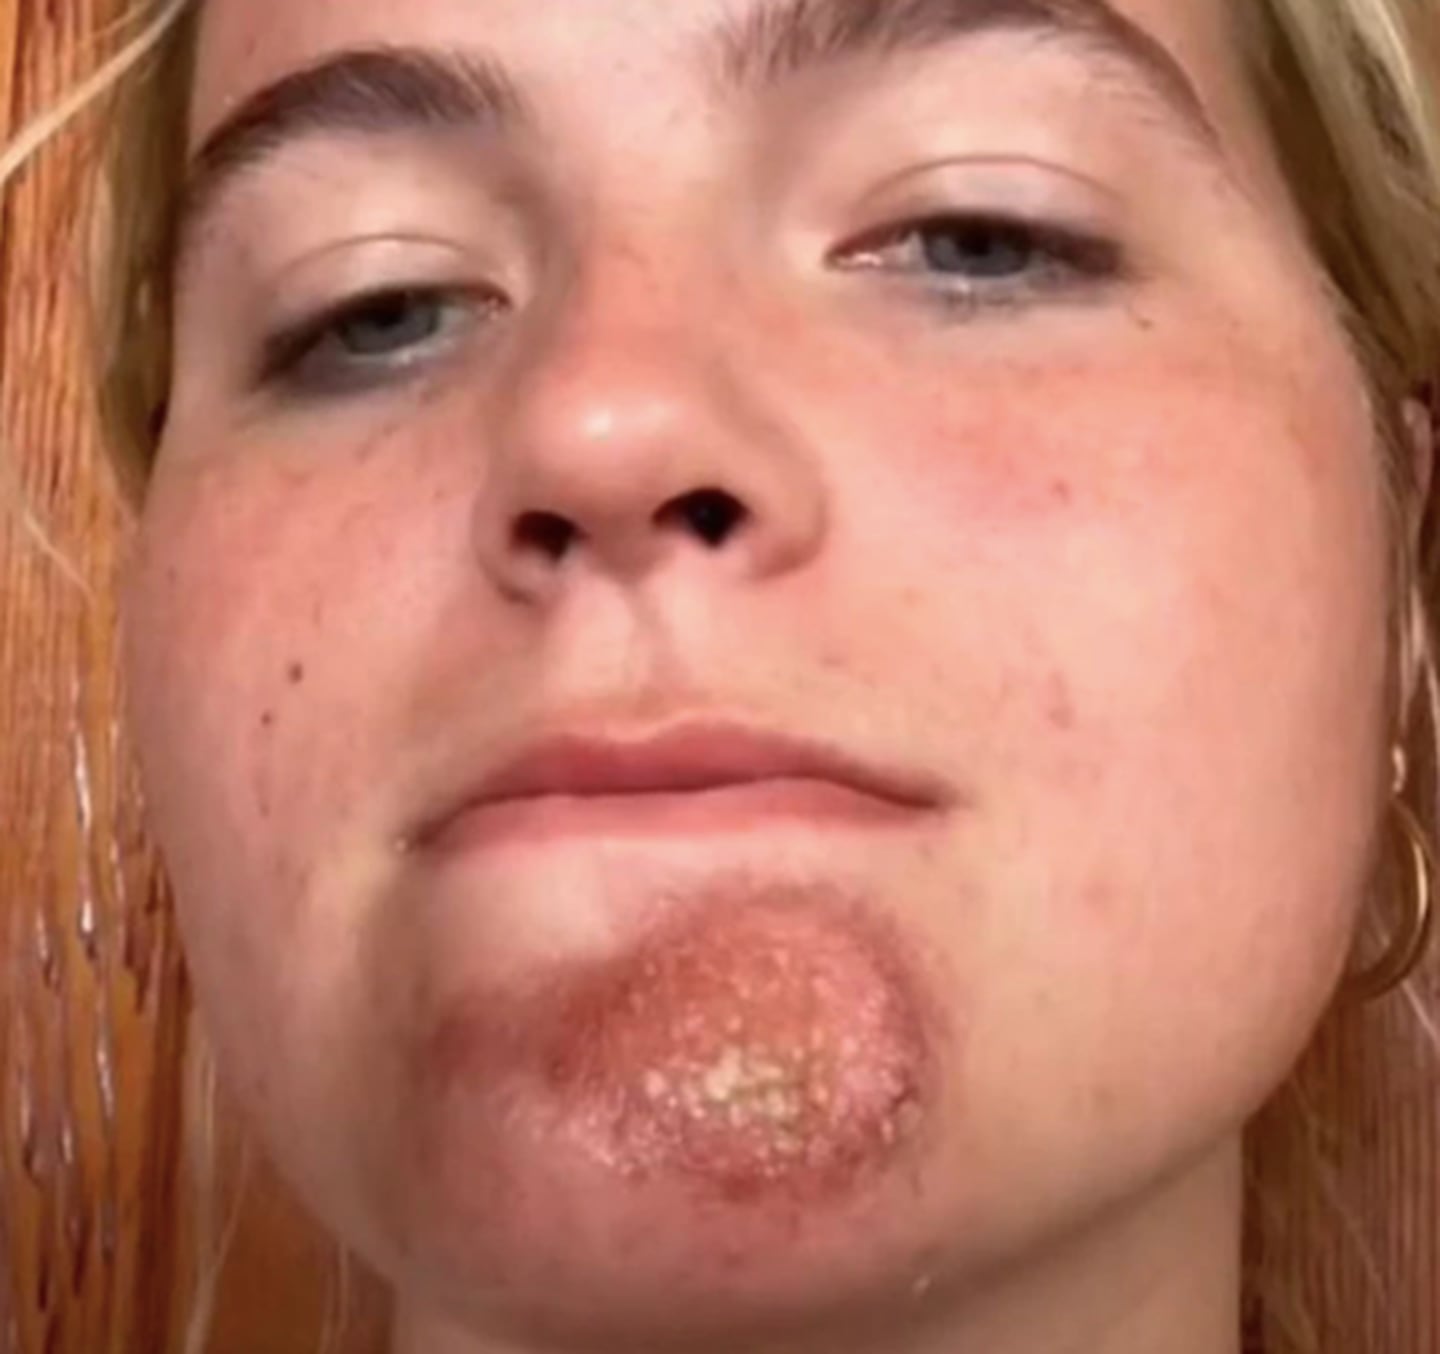 Hannah developed blisters and painful red sores. Photo / TikTok